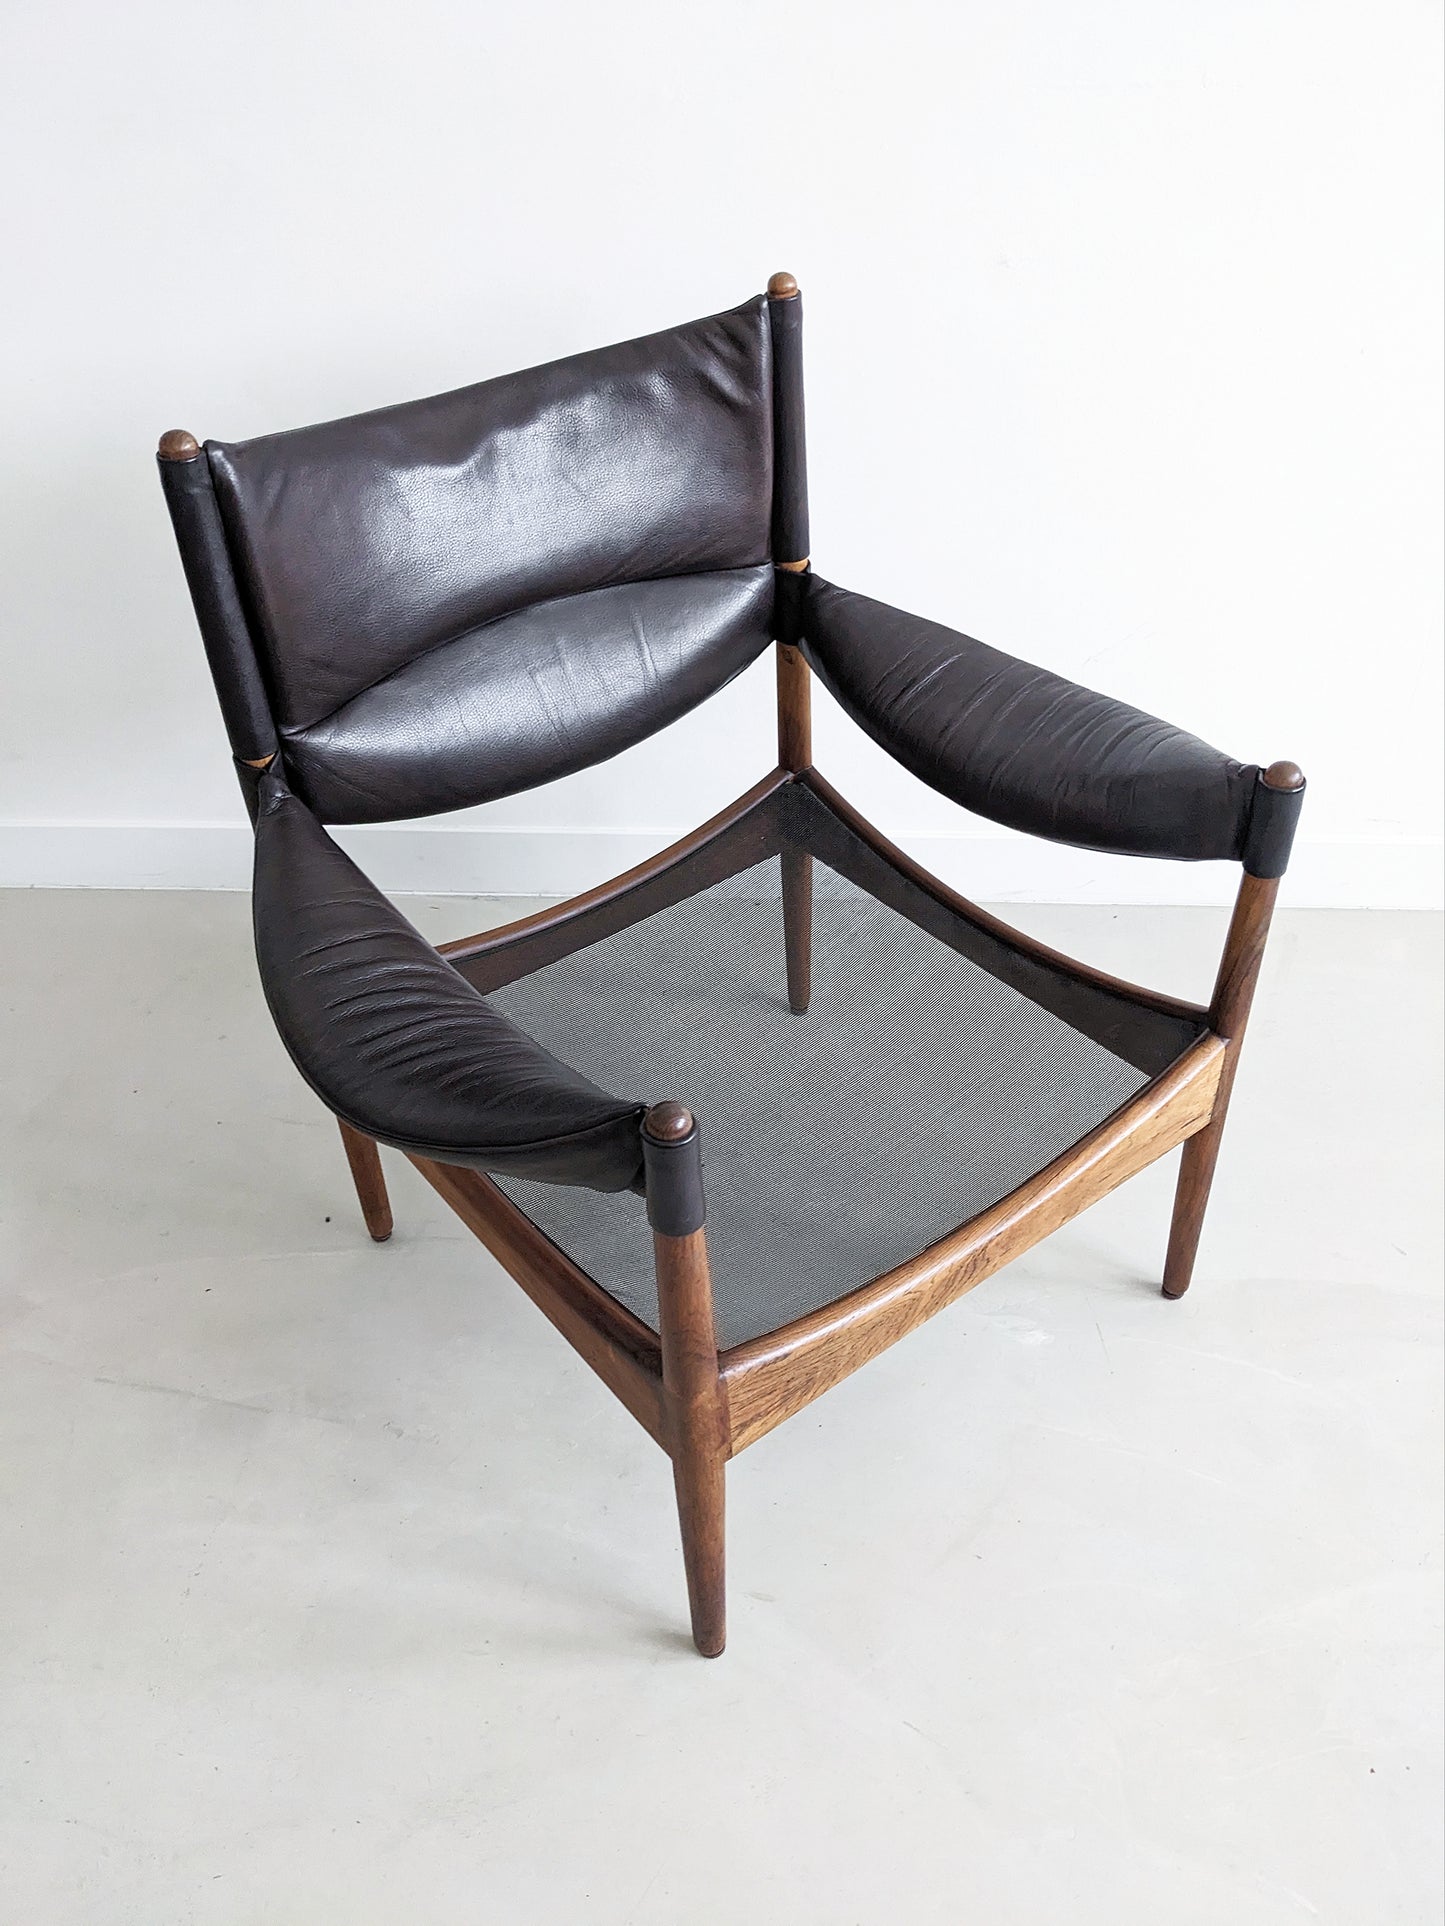 Set of 2 'Modus' Armchairs by Kristian Vedel for Søren Willadsen 1960's